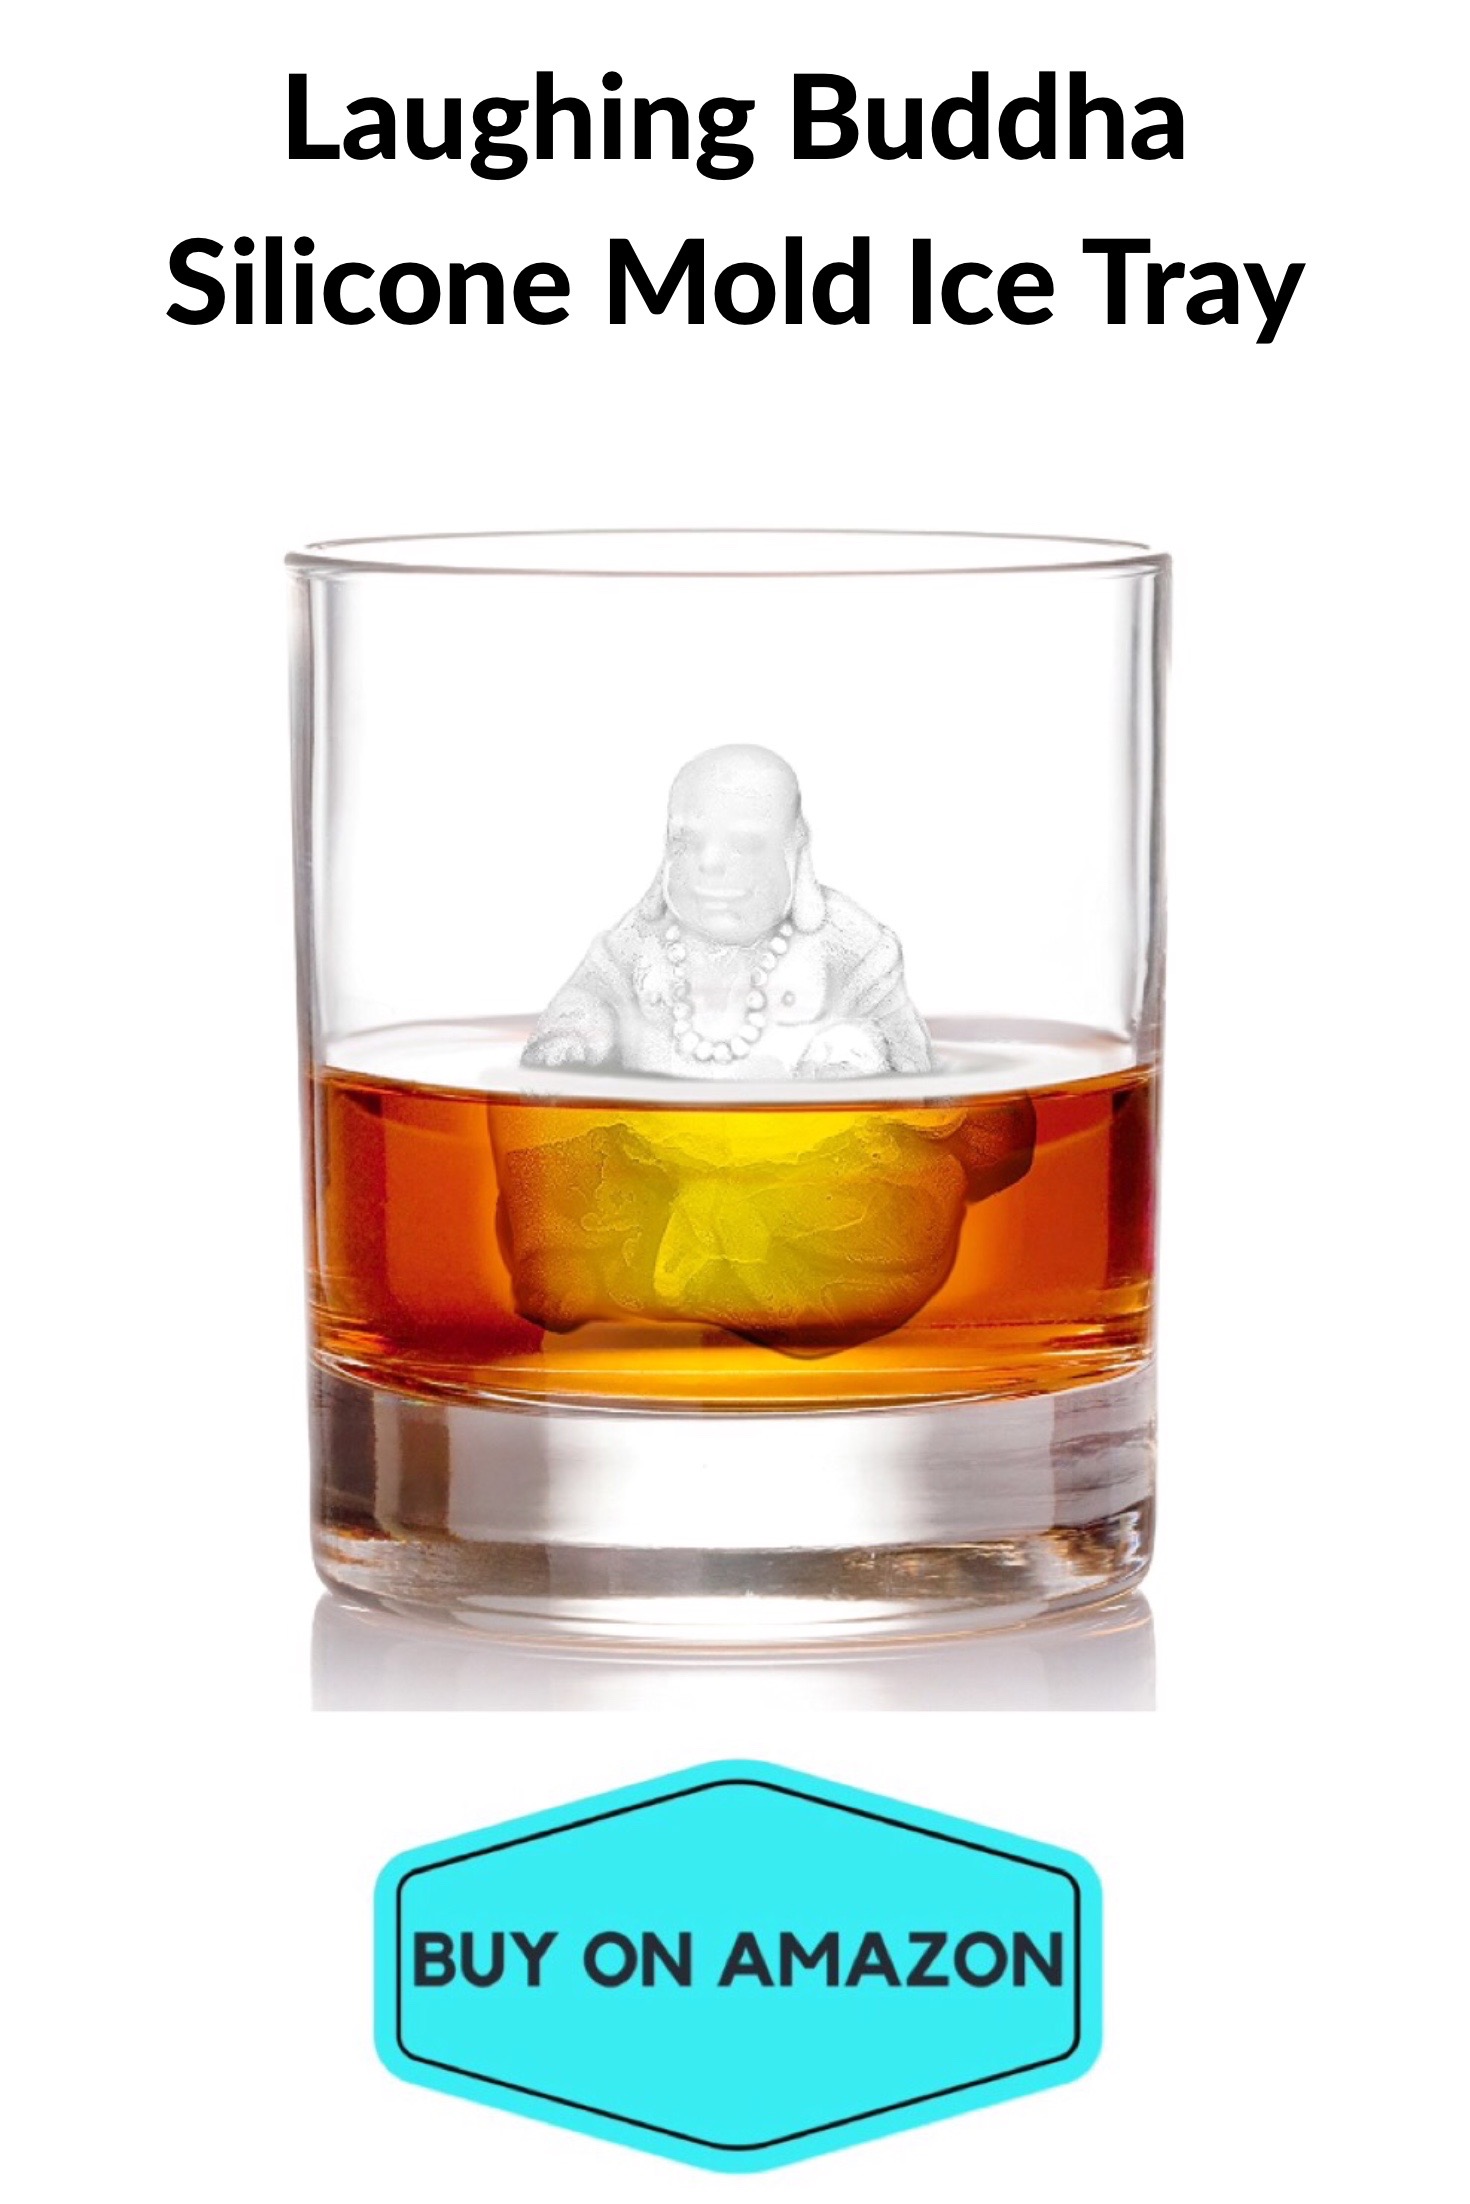 Laughing Buddha Silicone Mold Ice Tray